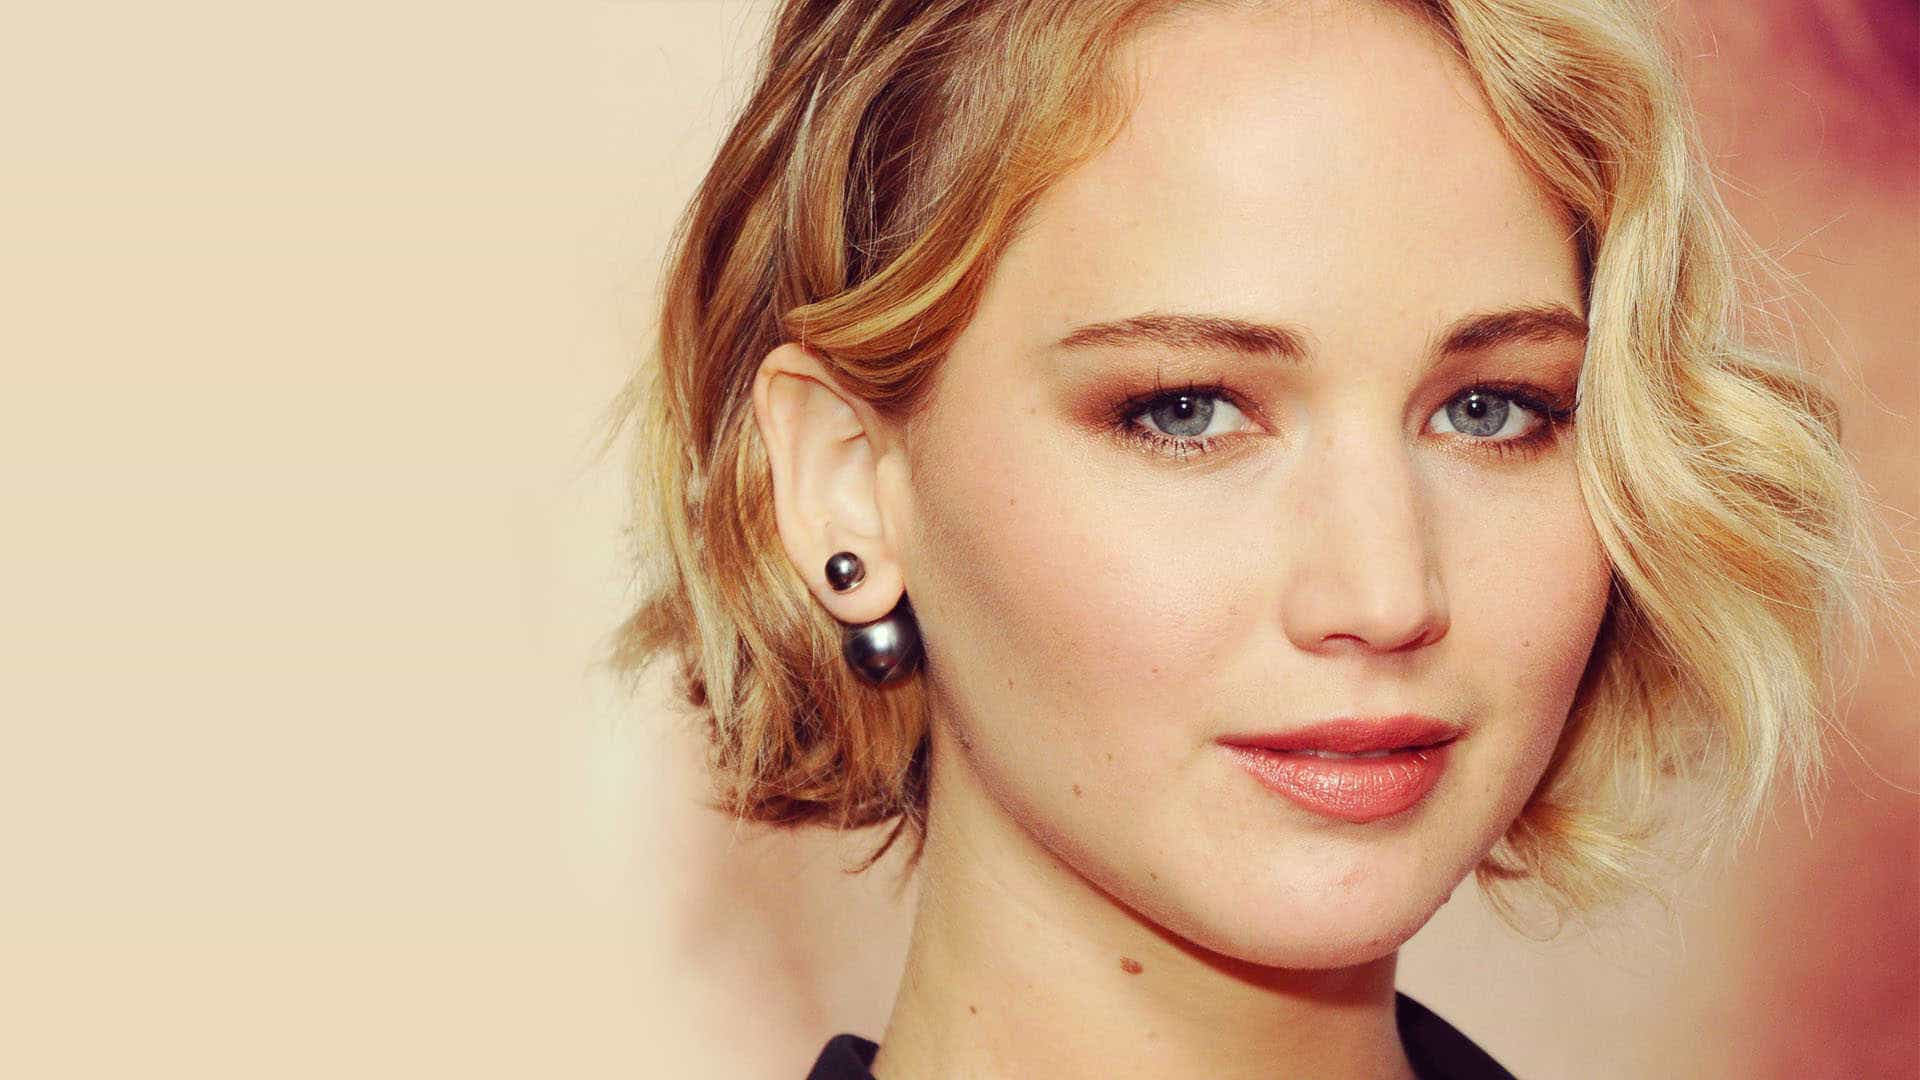 hollywood celebrities, hot hollywood actresses, hottest celebrities, Jennifer Lawrence age, Jennifer Lawrence bikini, Jennifer Lawrence biography, Jennifer Lawrence boyfriend, Jennifer Lawrence bra size, Jennifer Lawrence breast size, Jennifer Lawrence butt size, Jennifer Lawrence cup size, Jennifer Lawrence dress size, Jennifer Lawrence eyes color, Jennifer Lawrence father, Jennifer Lawrence favorite exercise, Jennifer Lawrence favorite food, Jennifer Lawrence favorite perfume, Jennifer Lawrence favorite sport, Jennifer Lawrence feet size, Jennifer Lawrence full-body statistics, Jennifer Lawrence hair color, Jennifer Lawrence height, Jennifer Lawrence instagram, Jennifer Lawrence Measurements, Jennifer Lawrence merchandise, Jennifer Lawrence mother, Jennifer Lawrence movies, Jennifer Lawrence net worth, Jennifer Lawrence personal info, Jennifer Lawrence shoe, Jennifer Lawrence wallpapers, Jennifer Lawrence weight, most famous hollywood celebrities, top female hollywood stars